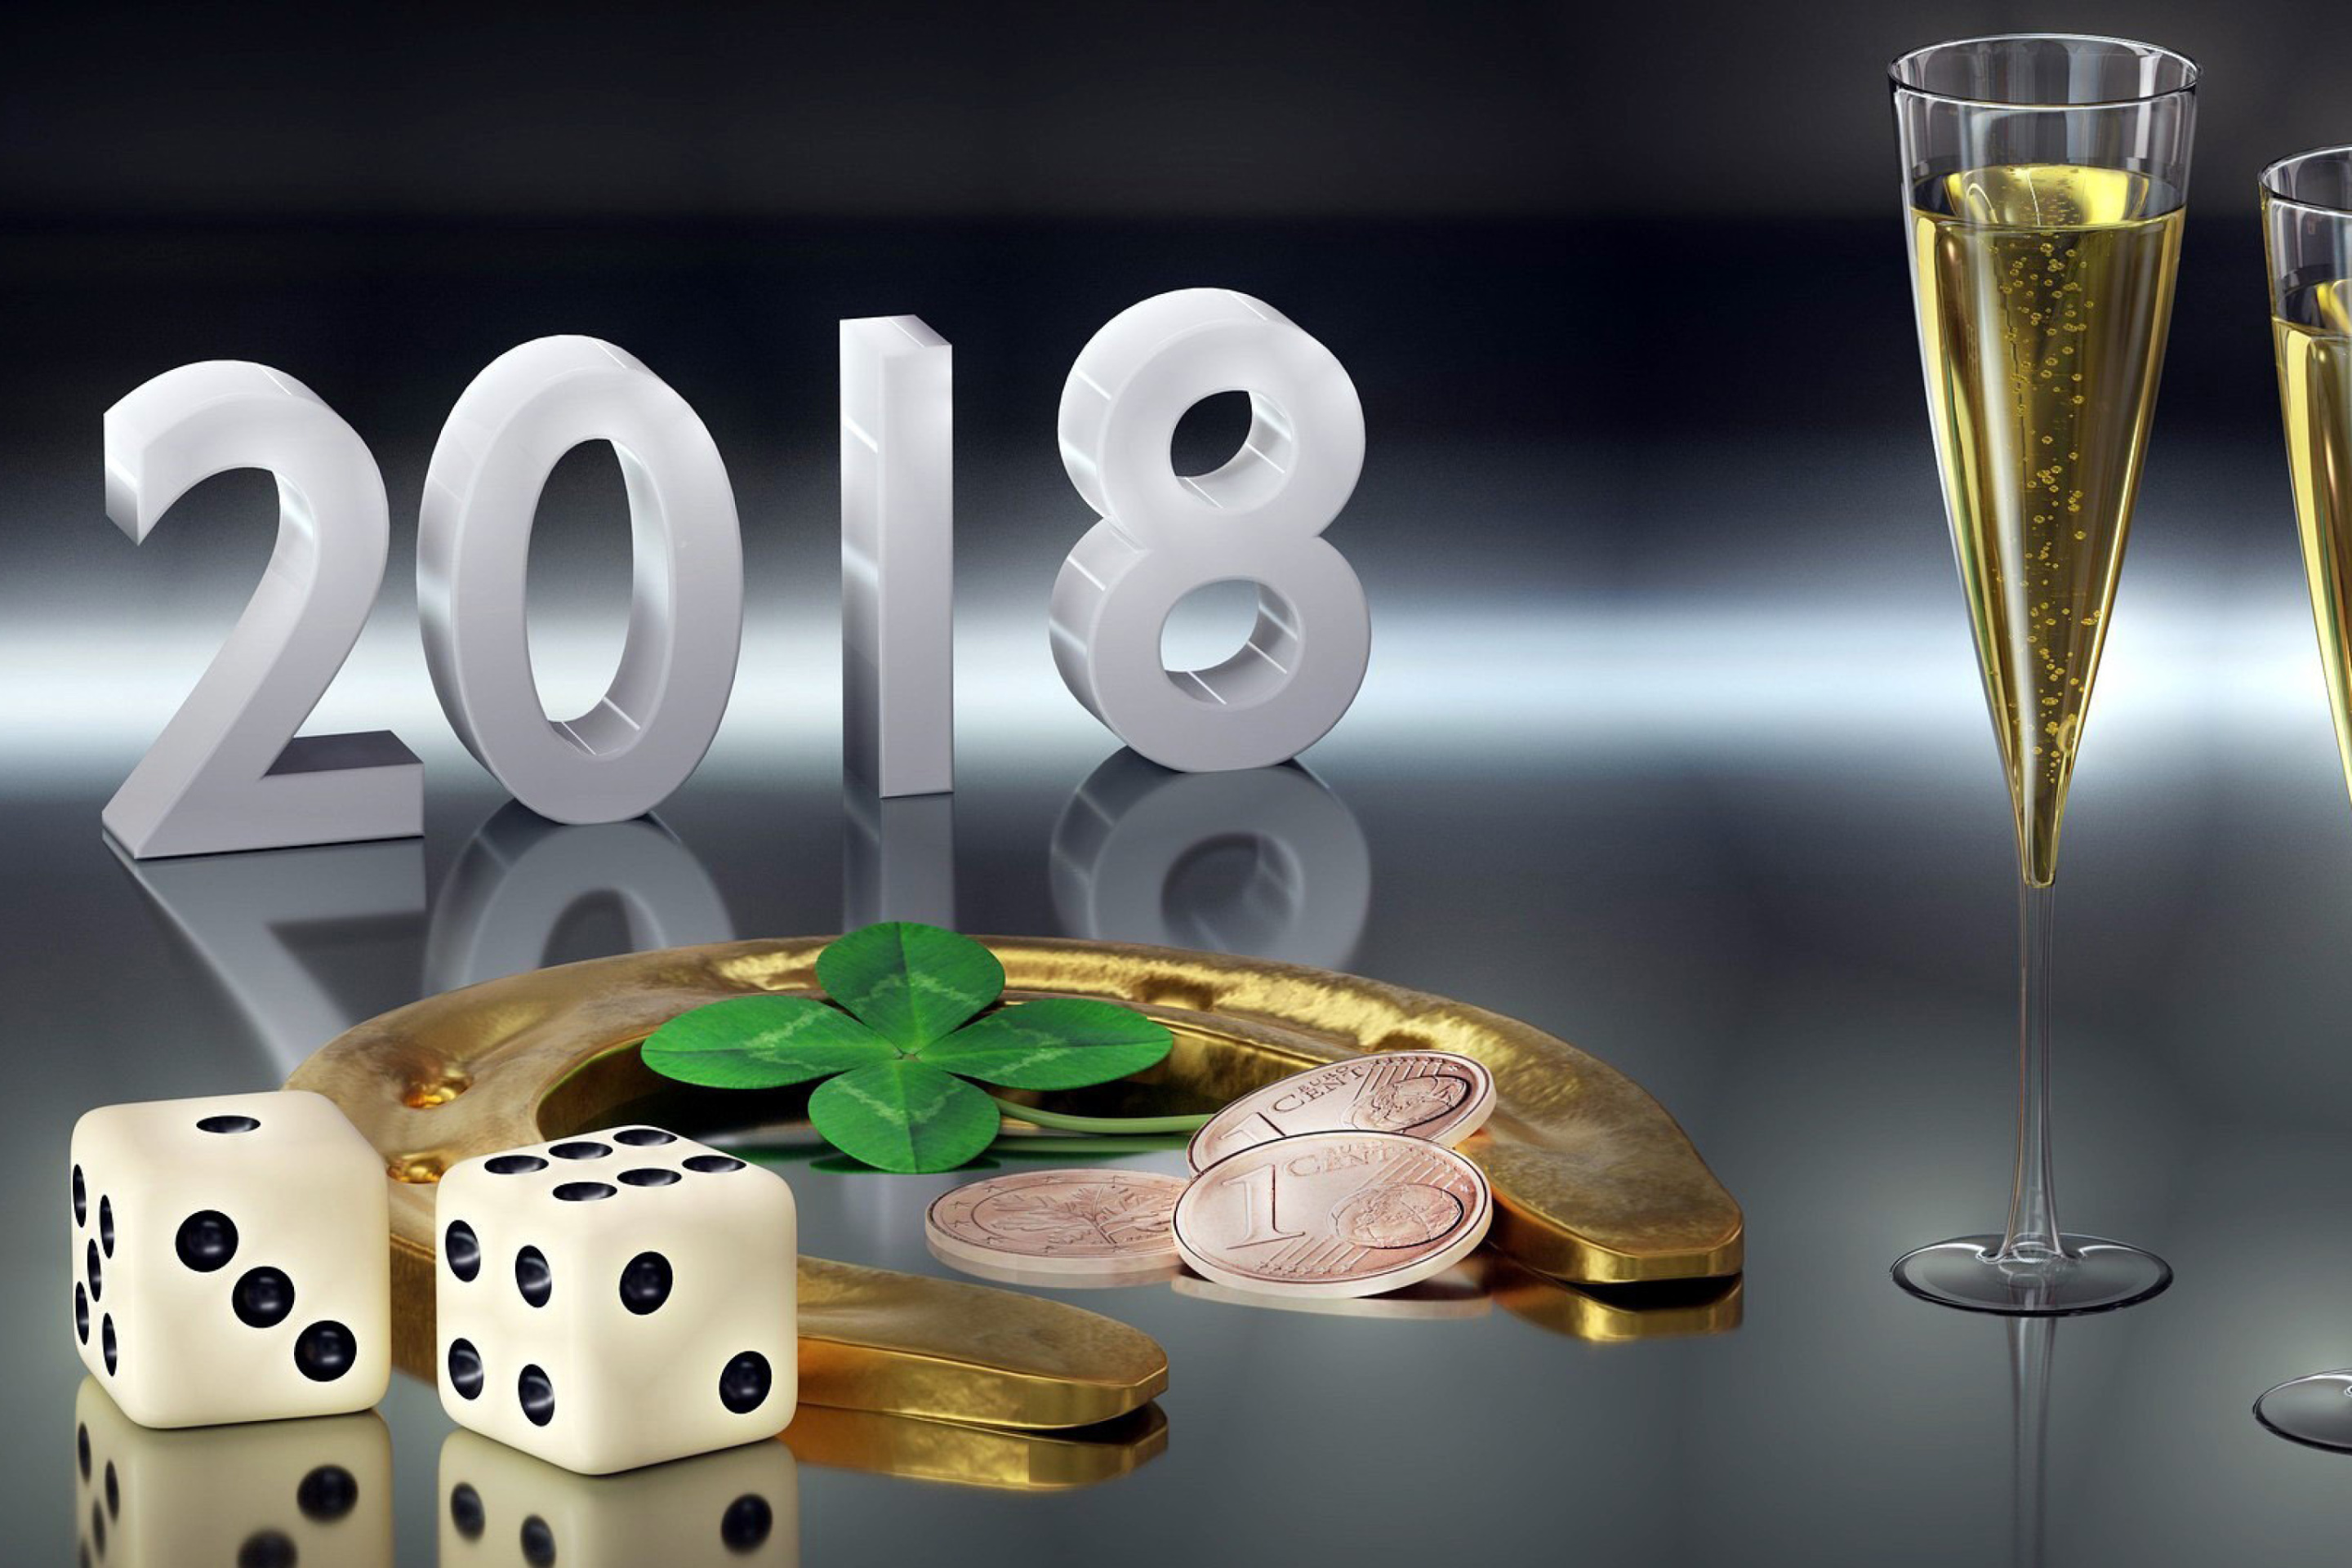 Happy New Year 2018 with Champagne wallpaper 2880x1920